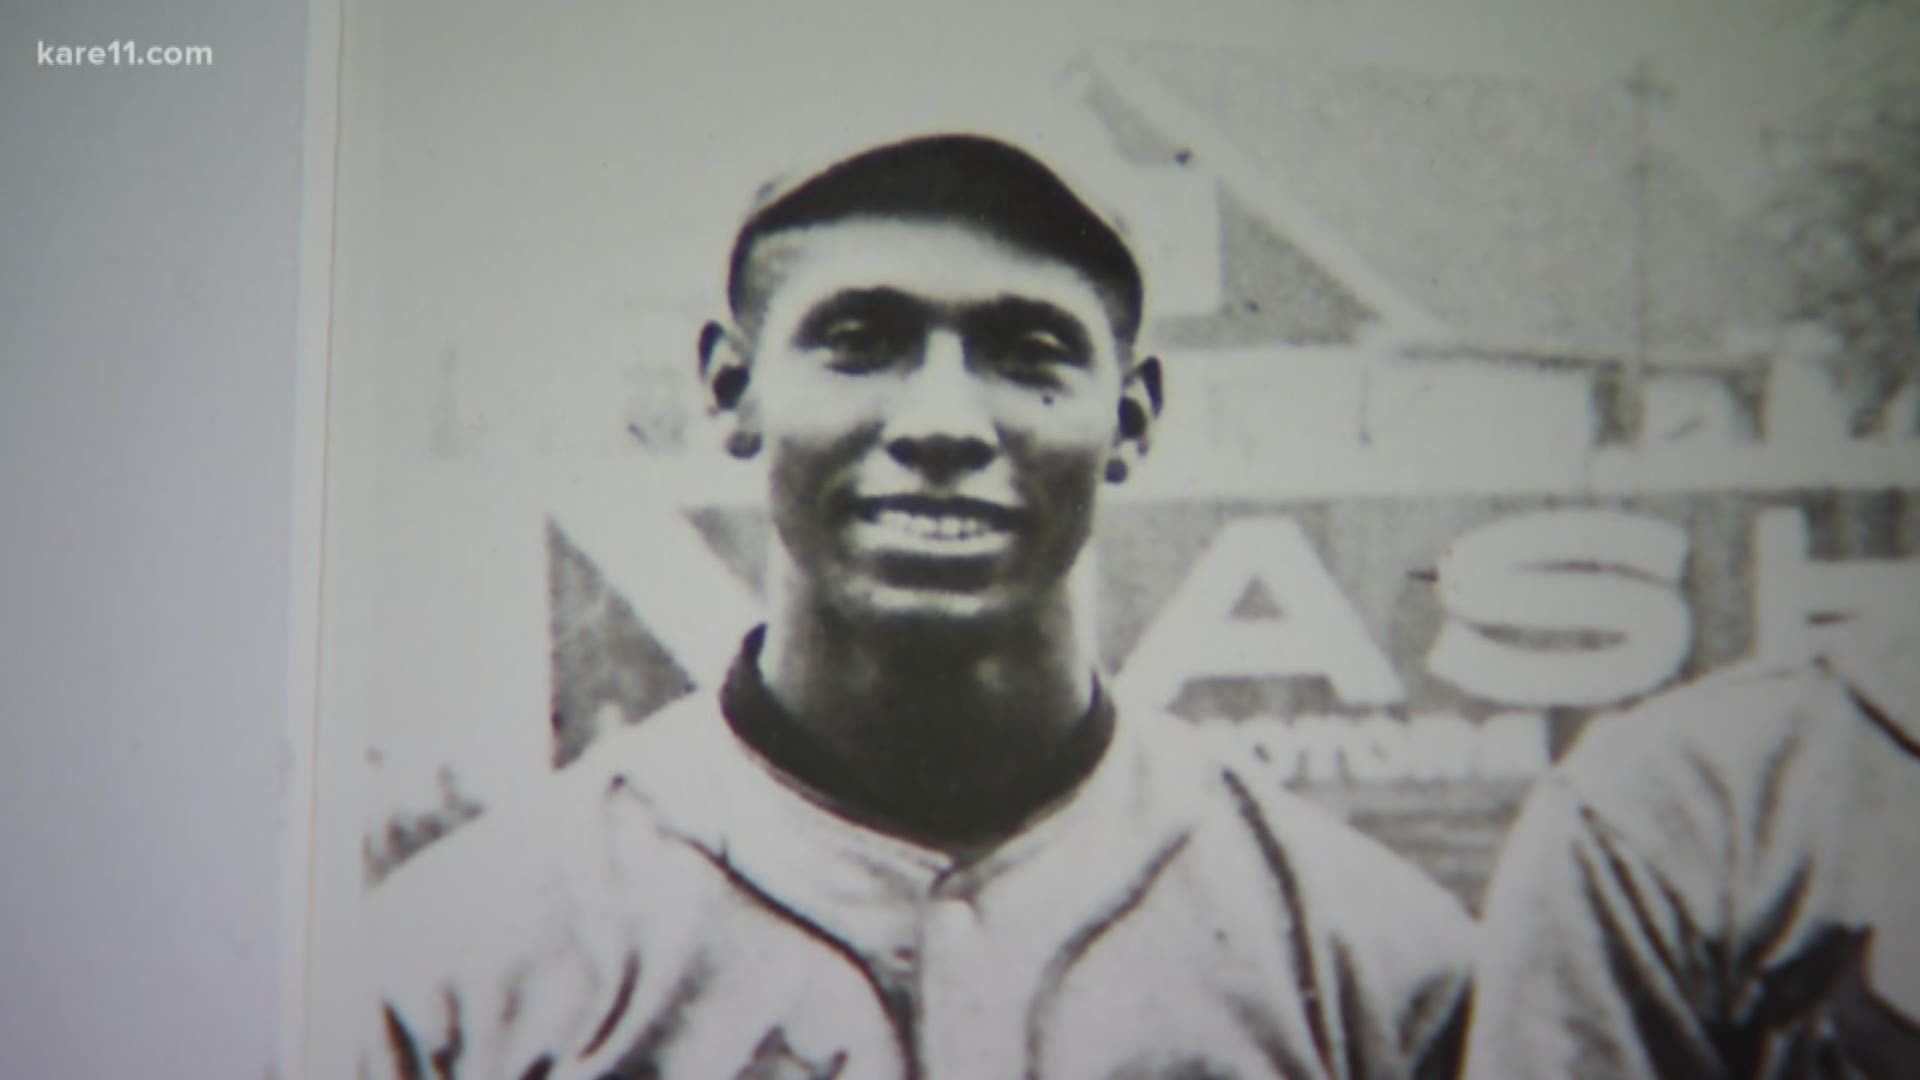 In Boyd Huppert's latest edition of Land of 10,000 Stories, Minnesotan Pete Gorton has spent 18 years piecing together the career of a dominant - yet forgotten - African American baseball pitcher. John Donaldson was denied access to the major leagues beca